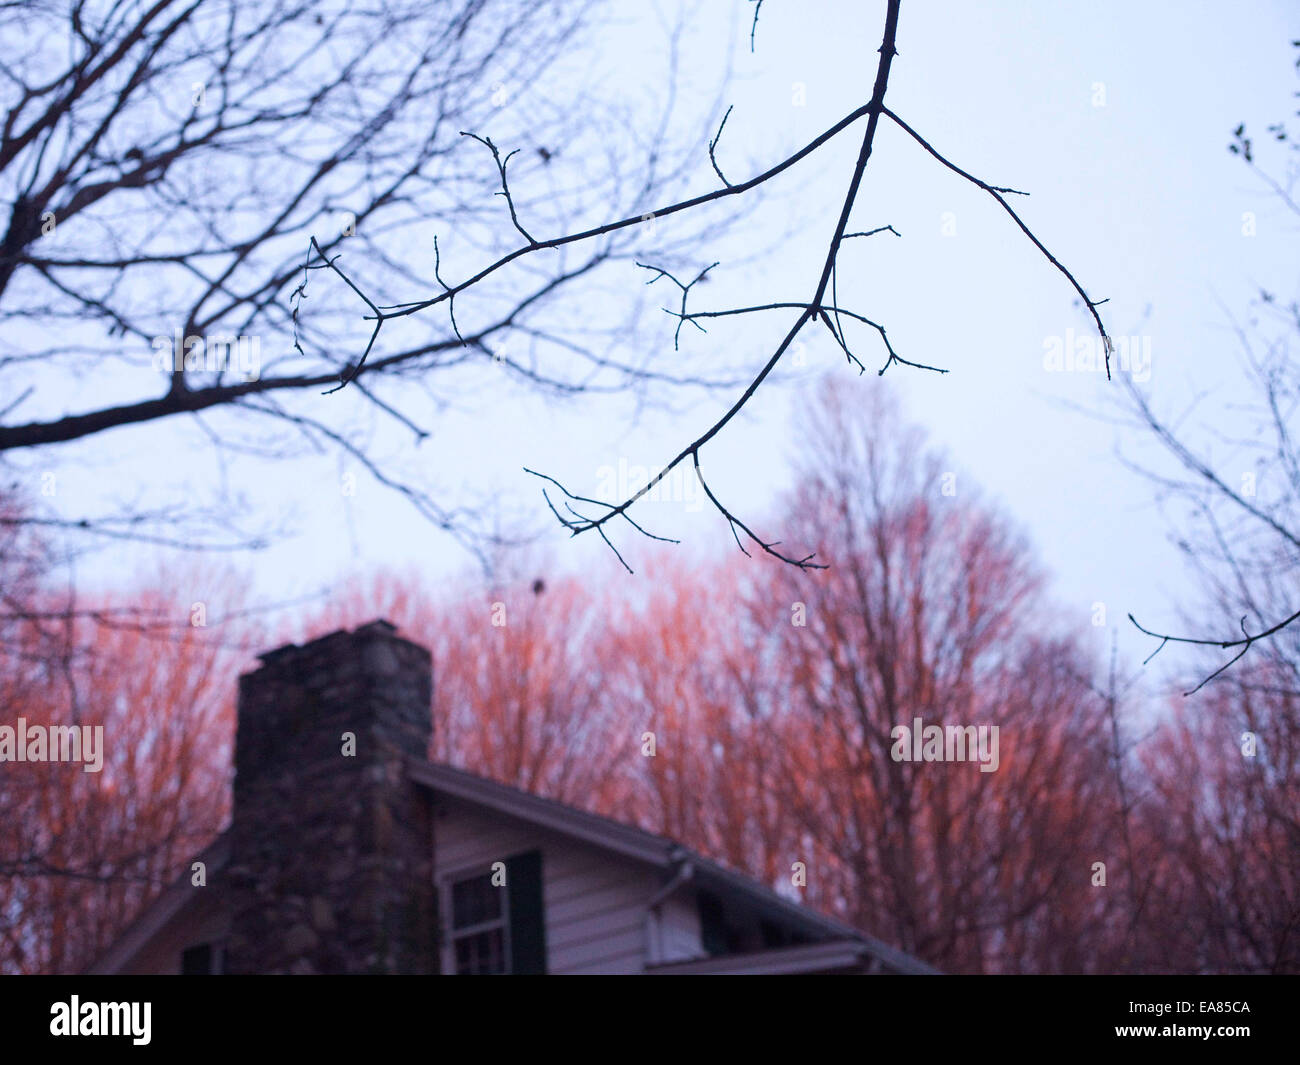 detail of branch and top of house in winter sunset Stock Photo